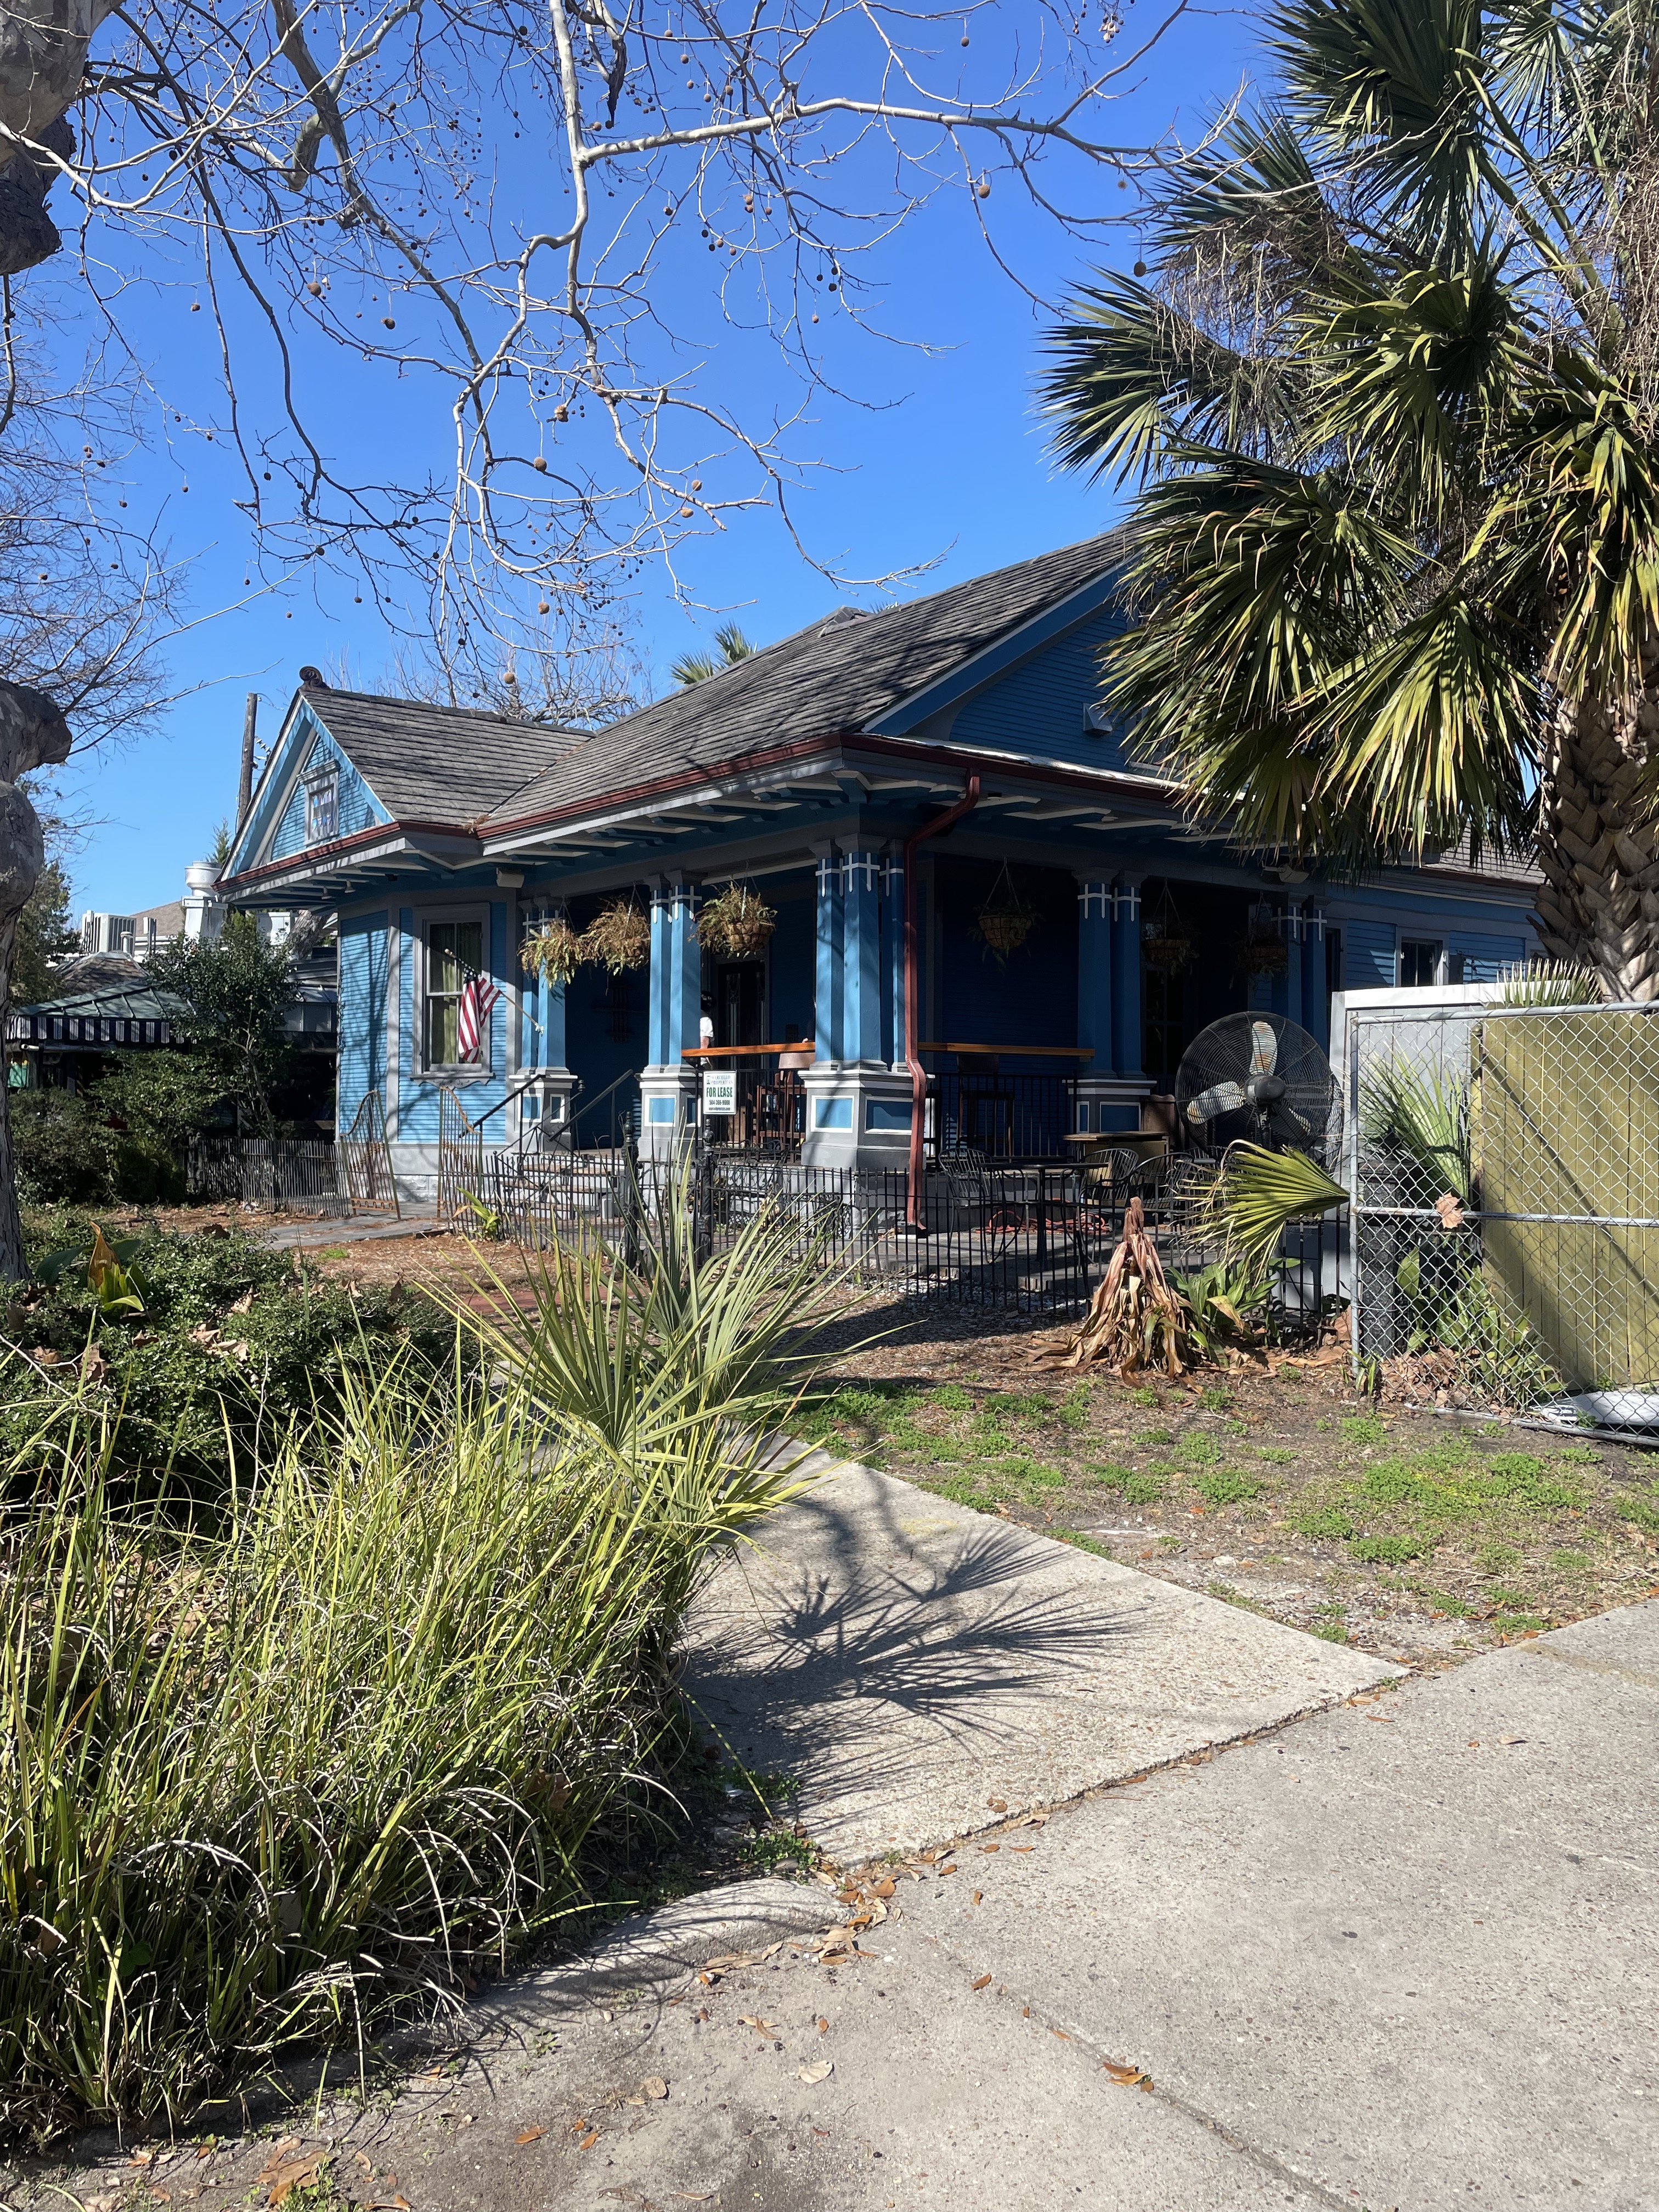 The exterior of a blue house with pillars and a porch, and a leafy yard and patio in front of it.